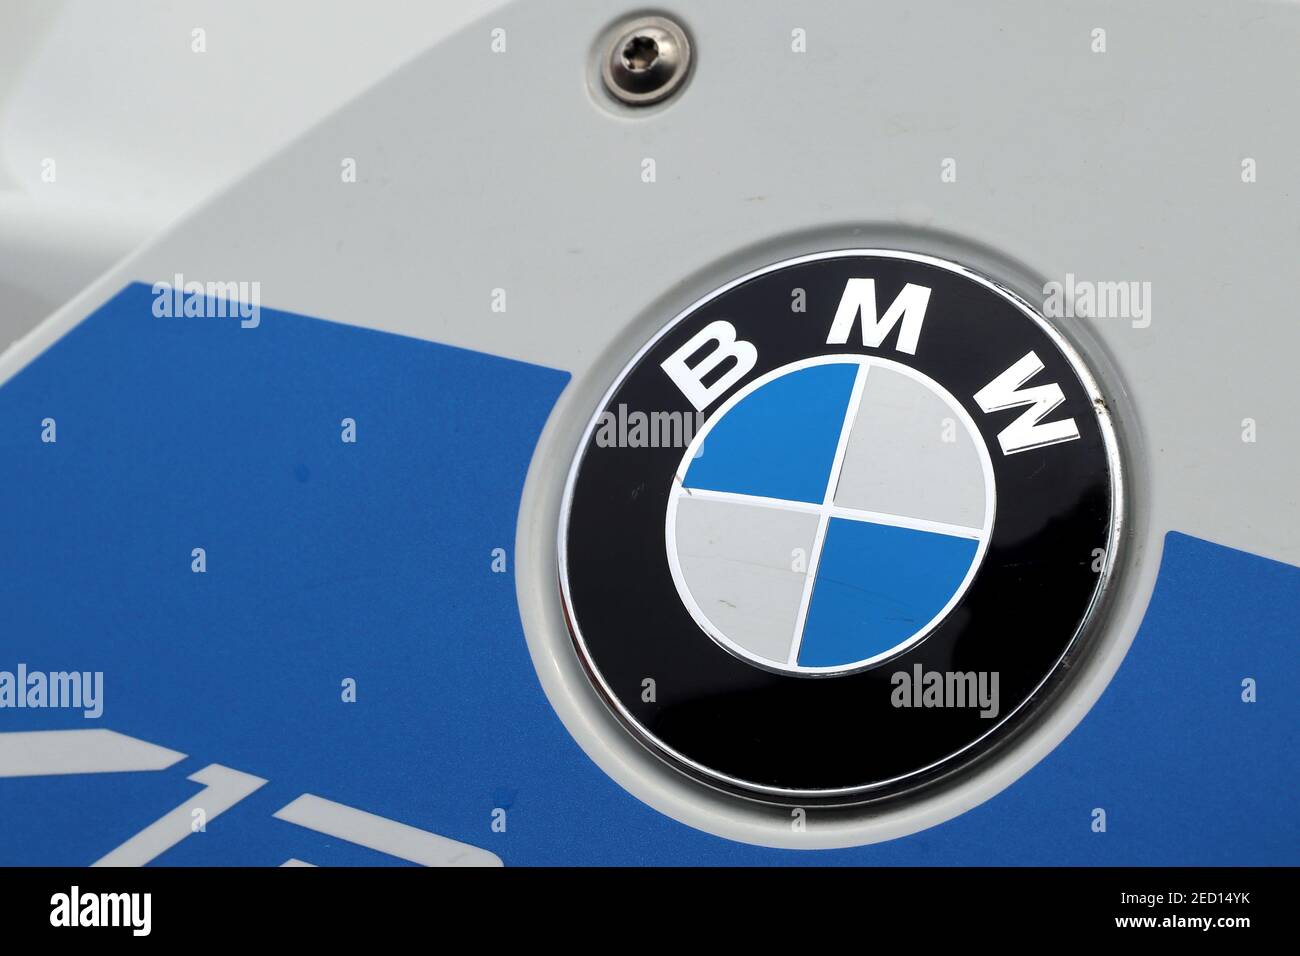 BMW logo on motorcycle in blue and white colors. BMW is characterized by clean driving range, high comfort and powerful lines. Stock Photo